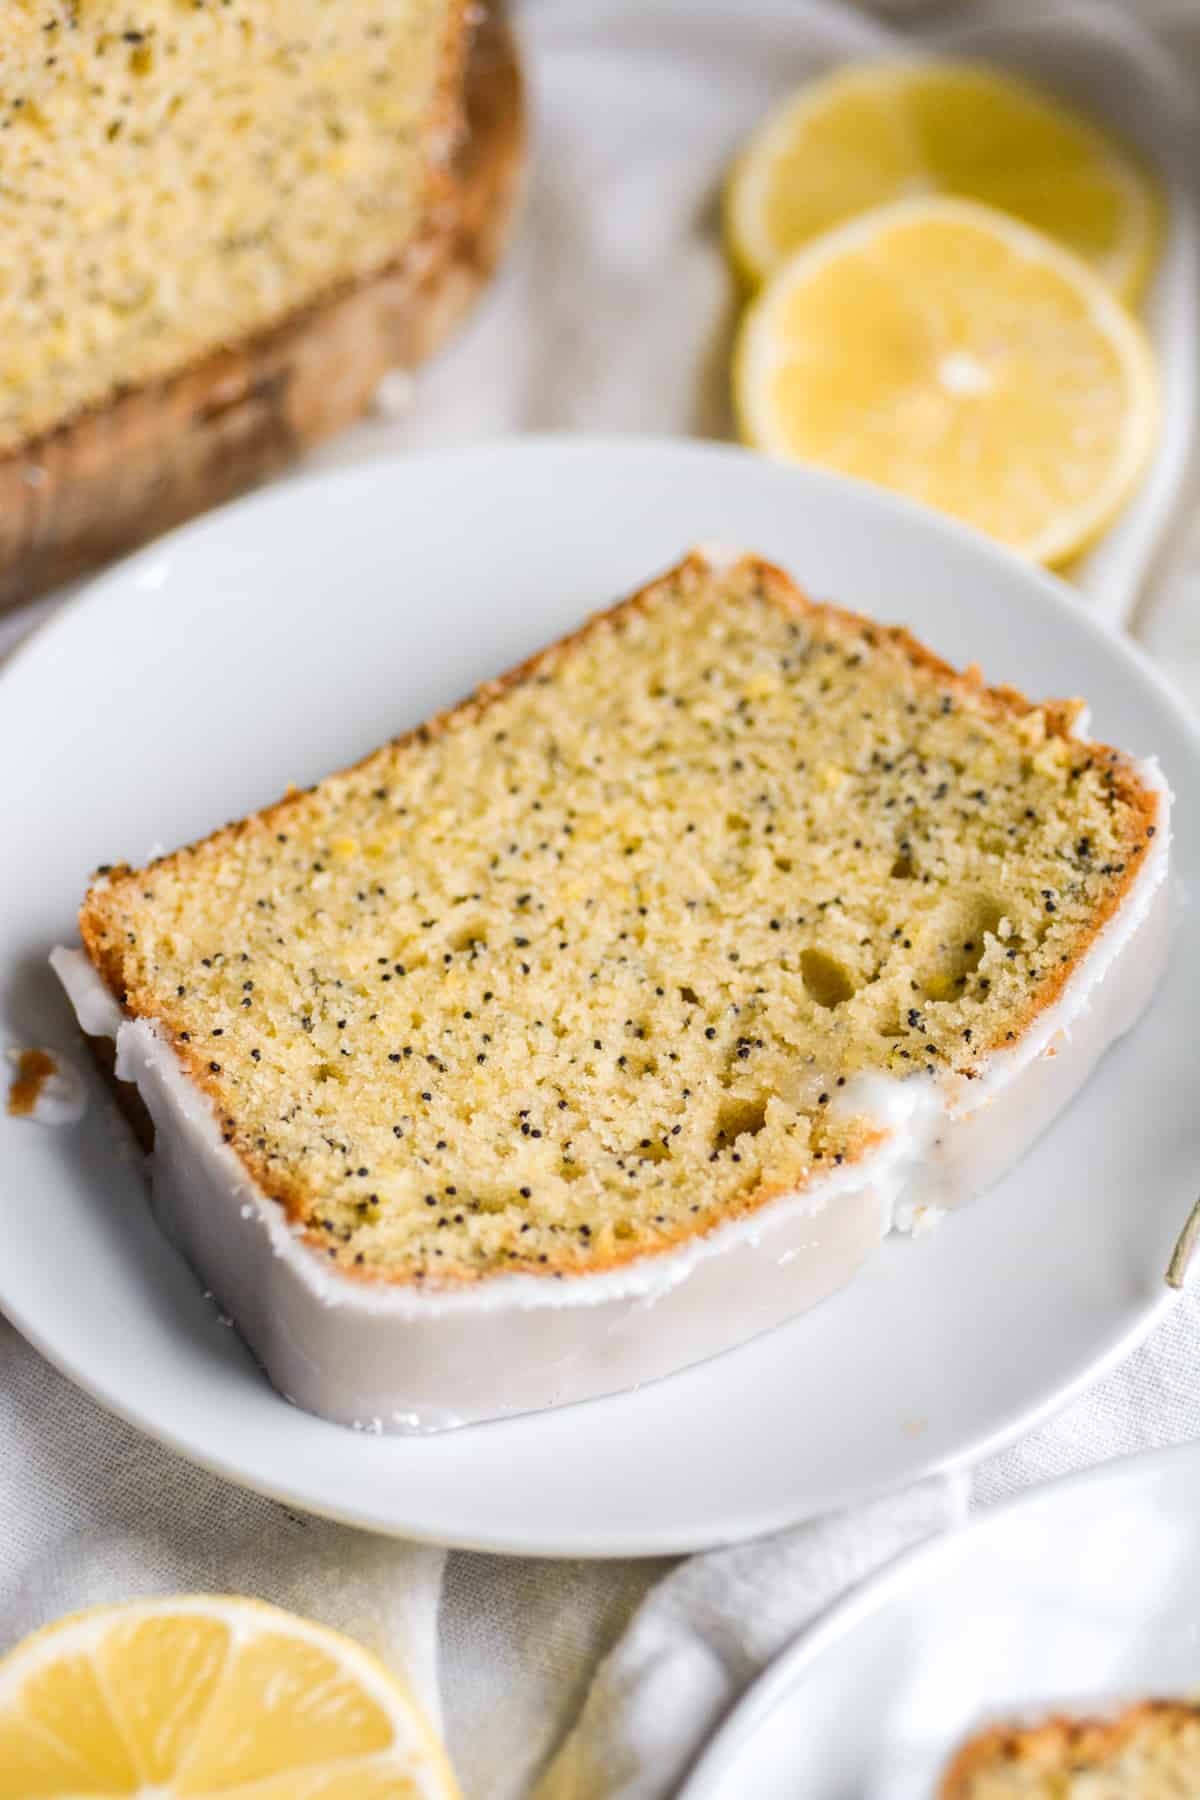 A slice of Vegan Lemon Poppyseed Pound Cake  on a white plate with lemon slices in the background.